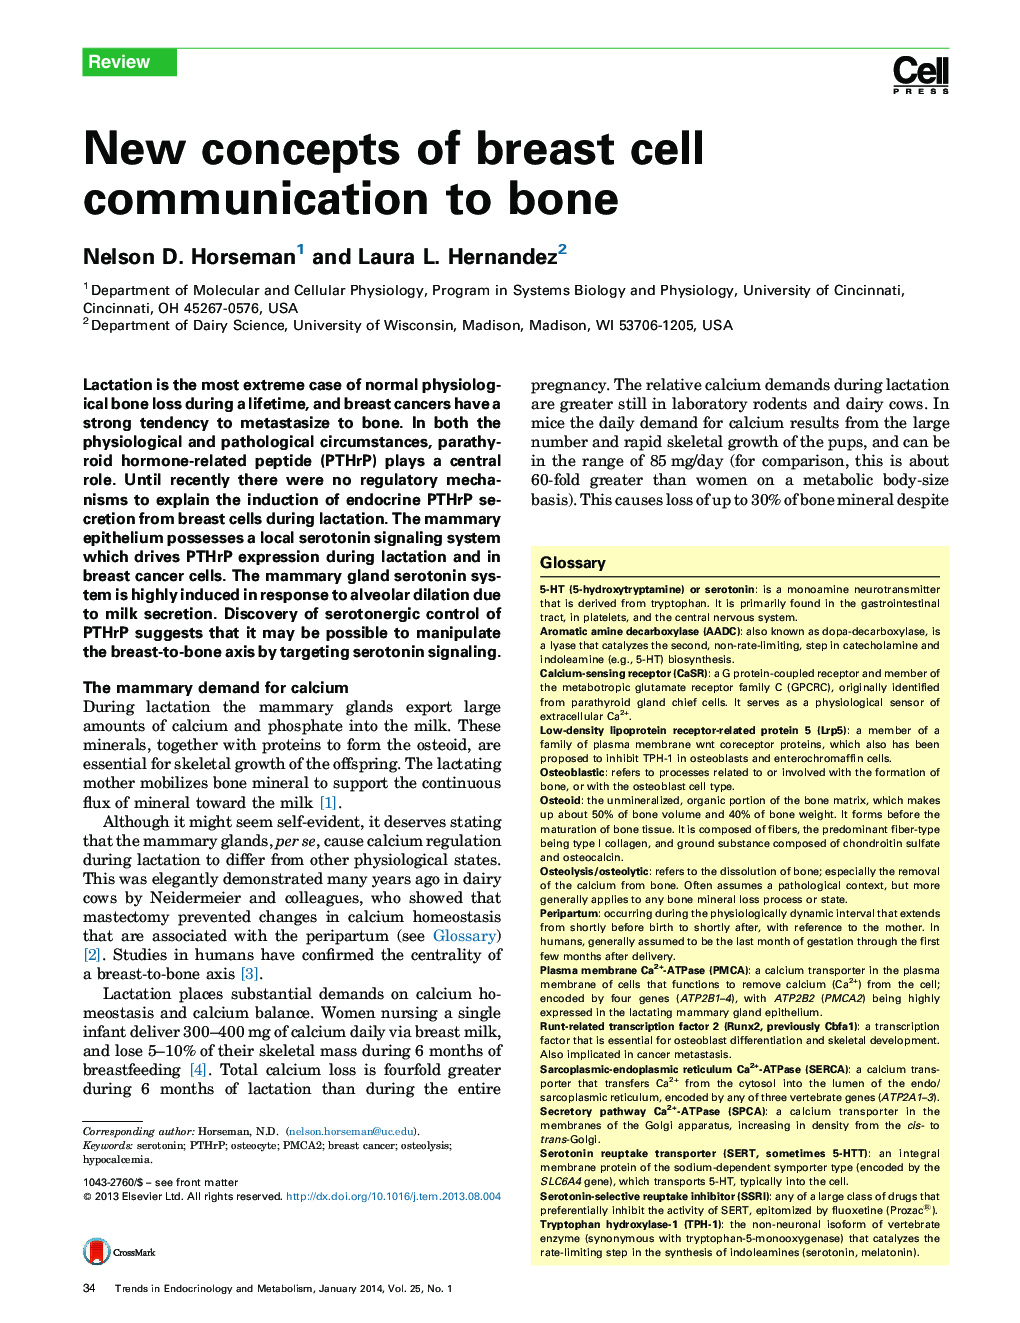 New concepts of breast cell communication to bone